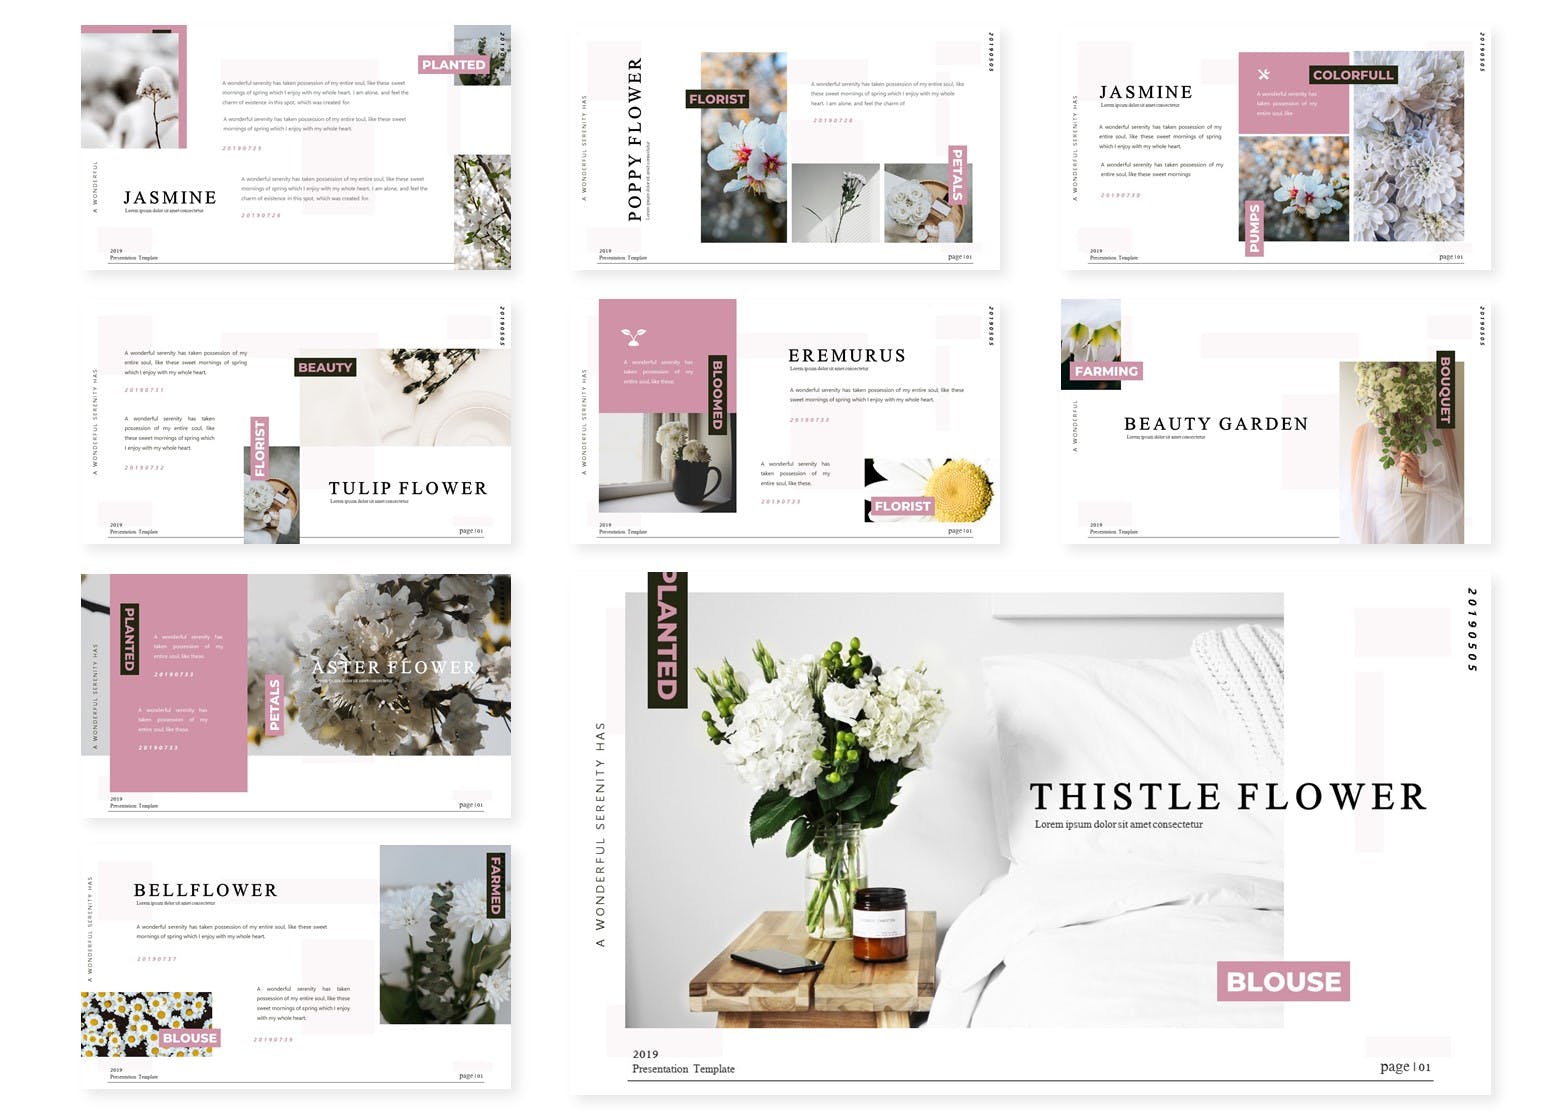 Light presentation slides with flower images and pink text blocks.